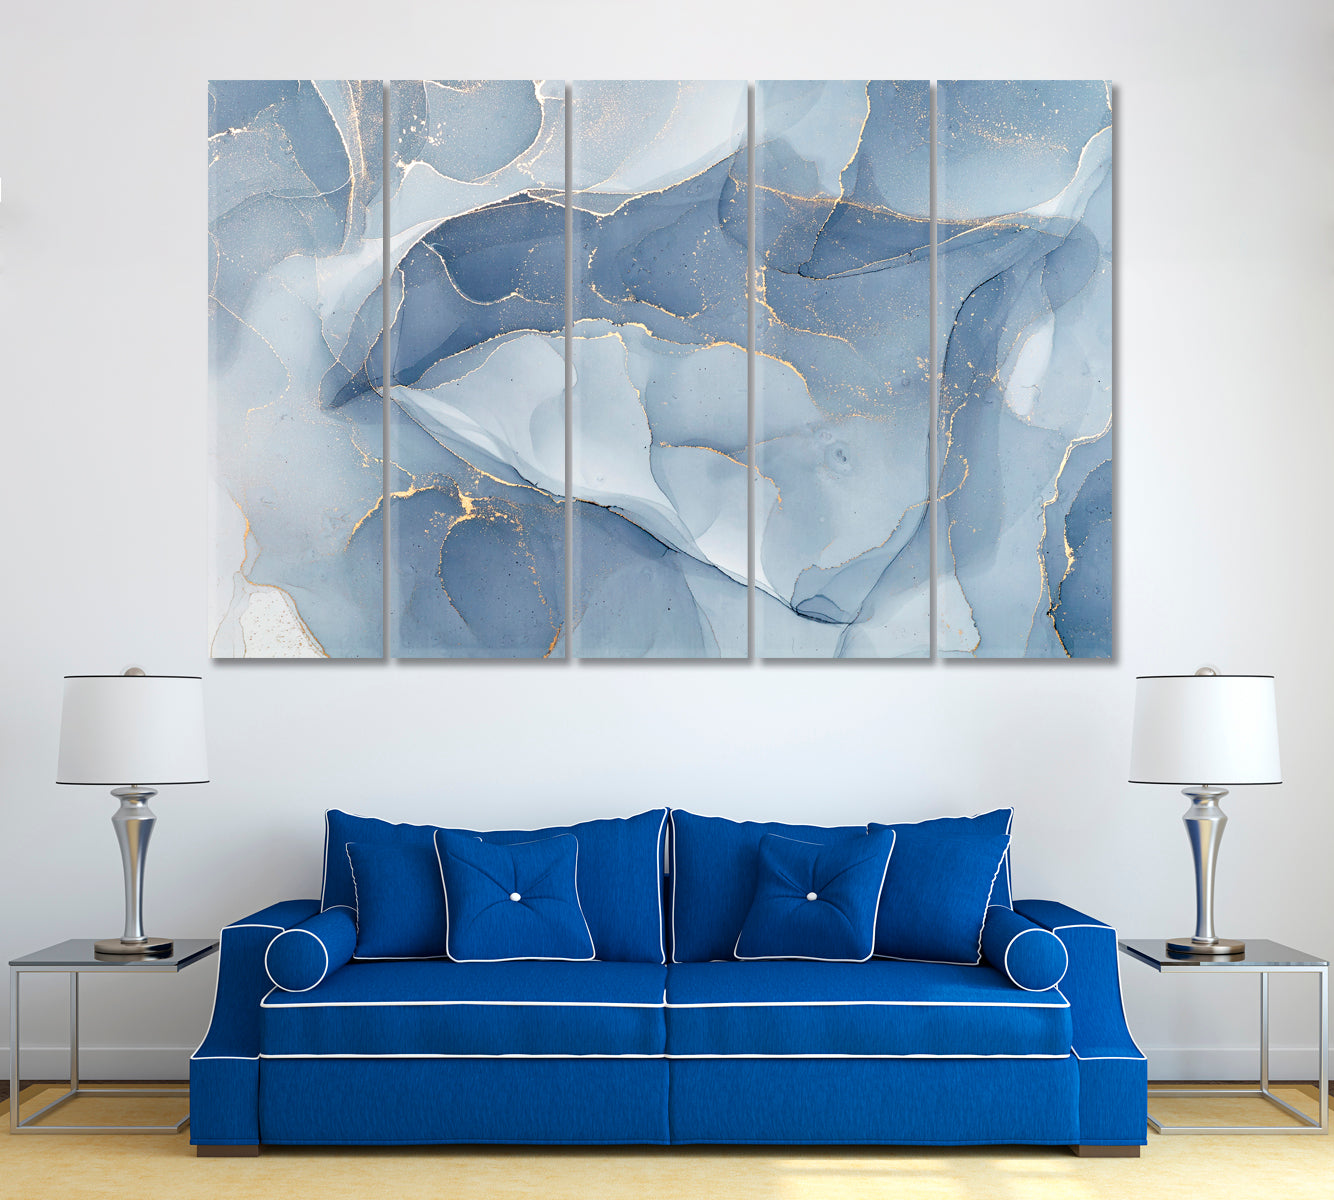 Blue Marble Ink Canvas Print ArtLexy 5 Panels 36"x24" inches 